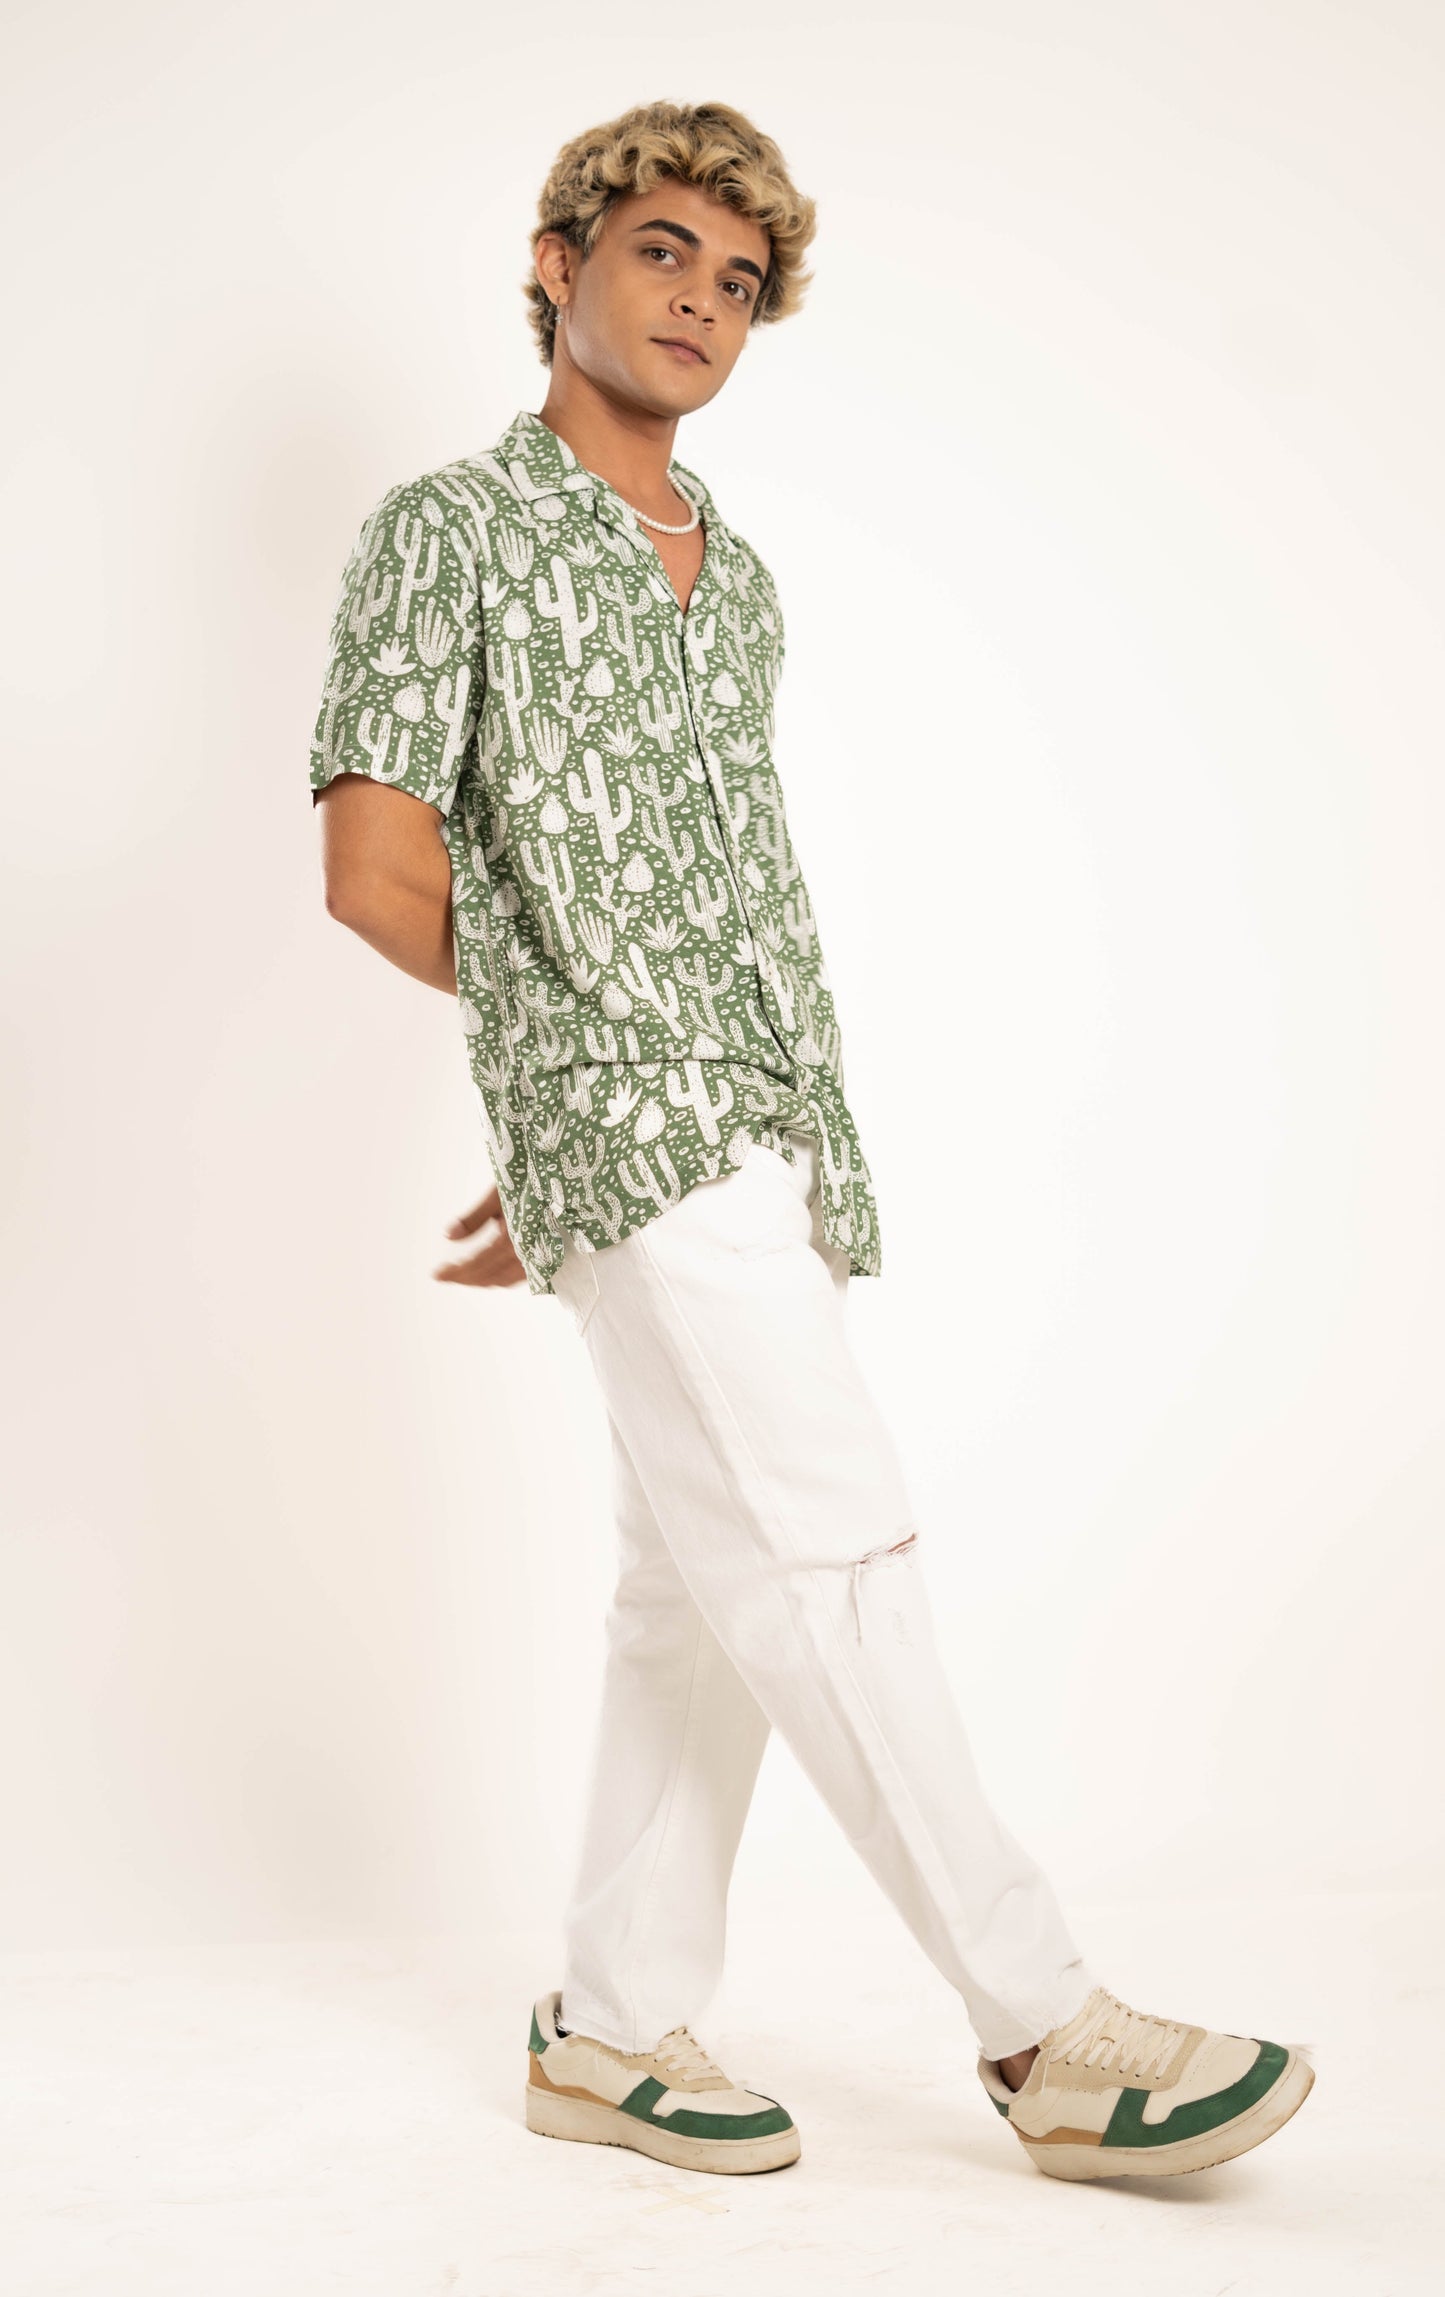 Men's Relaxed Fit Short Sleeves Pokey Cactus Printed Green Shirt